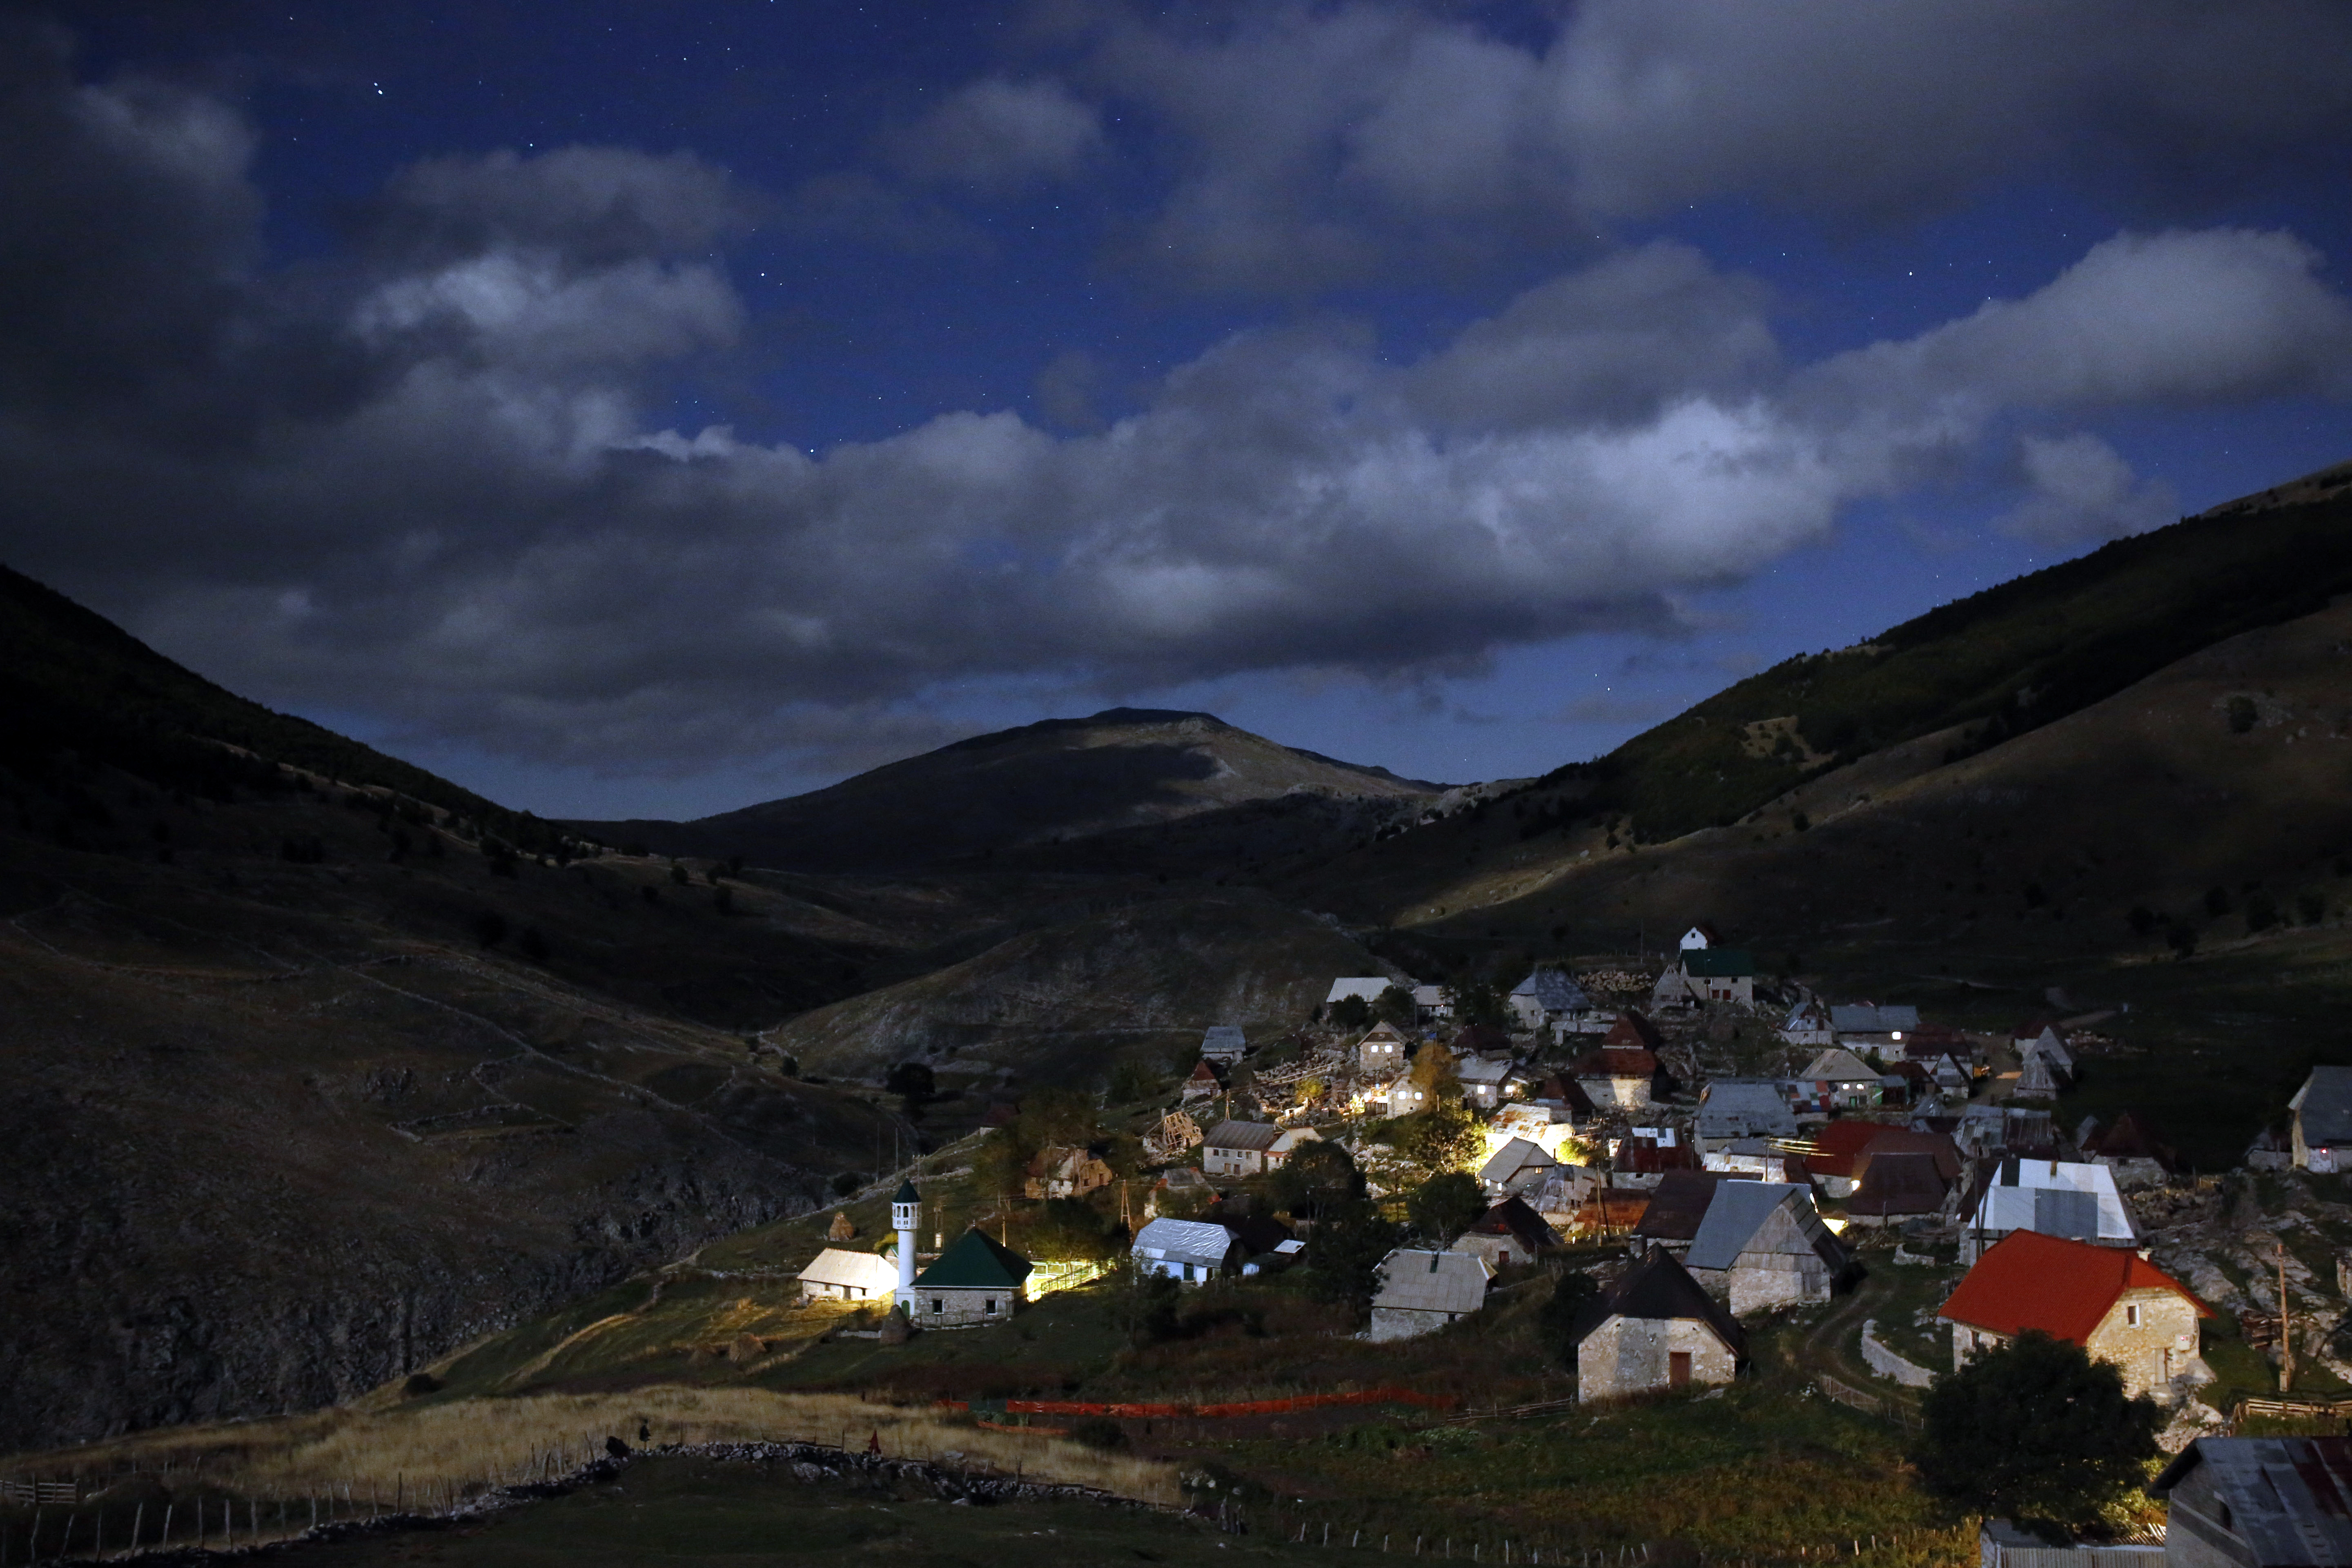 A mountain village is illuminated by moonlight as the 50 residents of village prepare to celebrate the Muslim holiday of Eid al-Adha, in the remote mountain village of Lukomir, 50 kms south of Sarajevo, on Thursday, Sept. 24, 2015. Bosnian Muslims will slaughter cattle later, with the beef and meat distributed to the needy for the holiday which honors the prophet Abraham for preparing to sacrifice his son on the order of God, who was testing his faith. (AP Photo/Amel Emric)